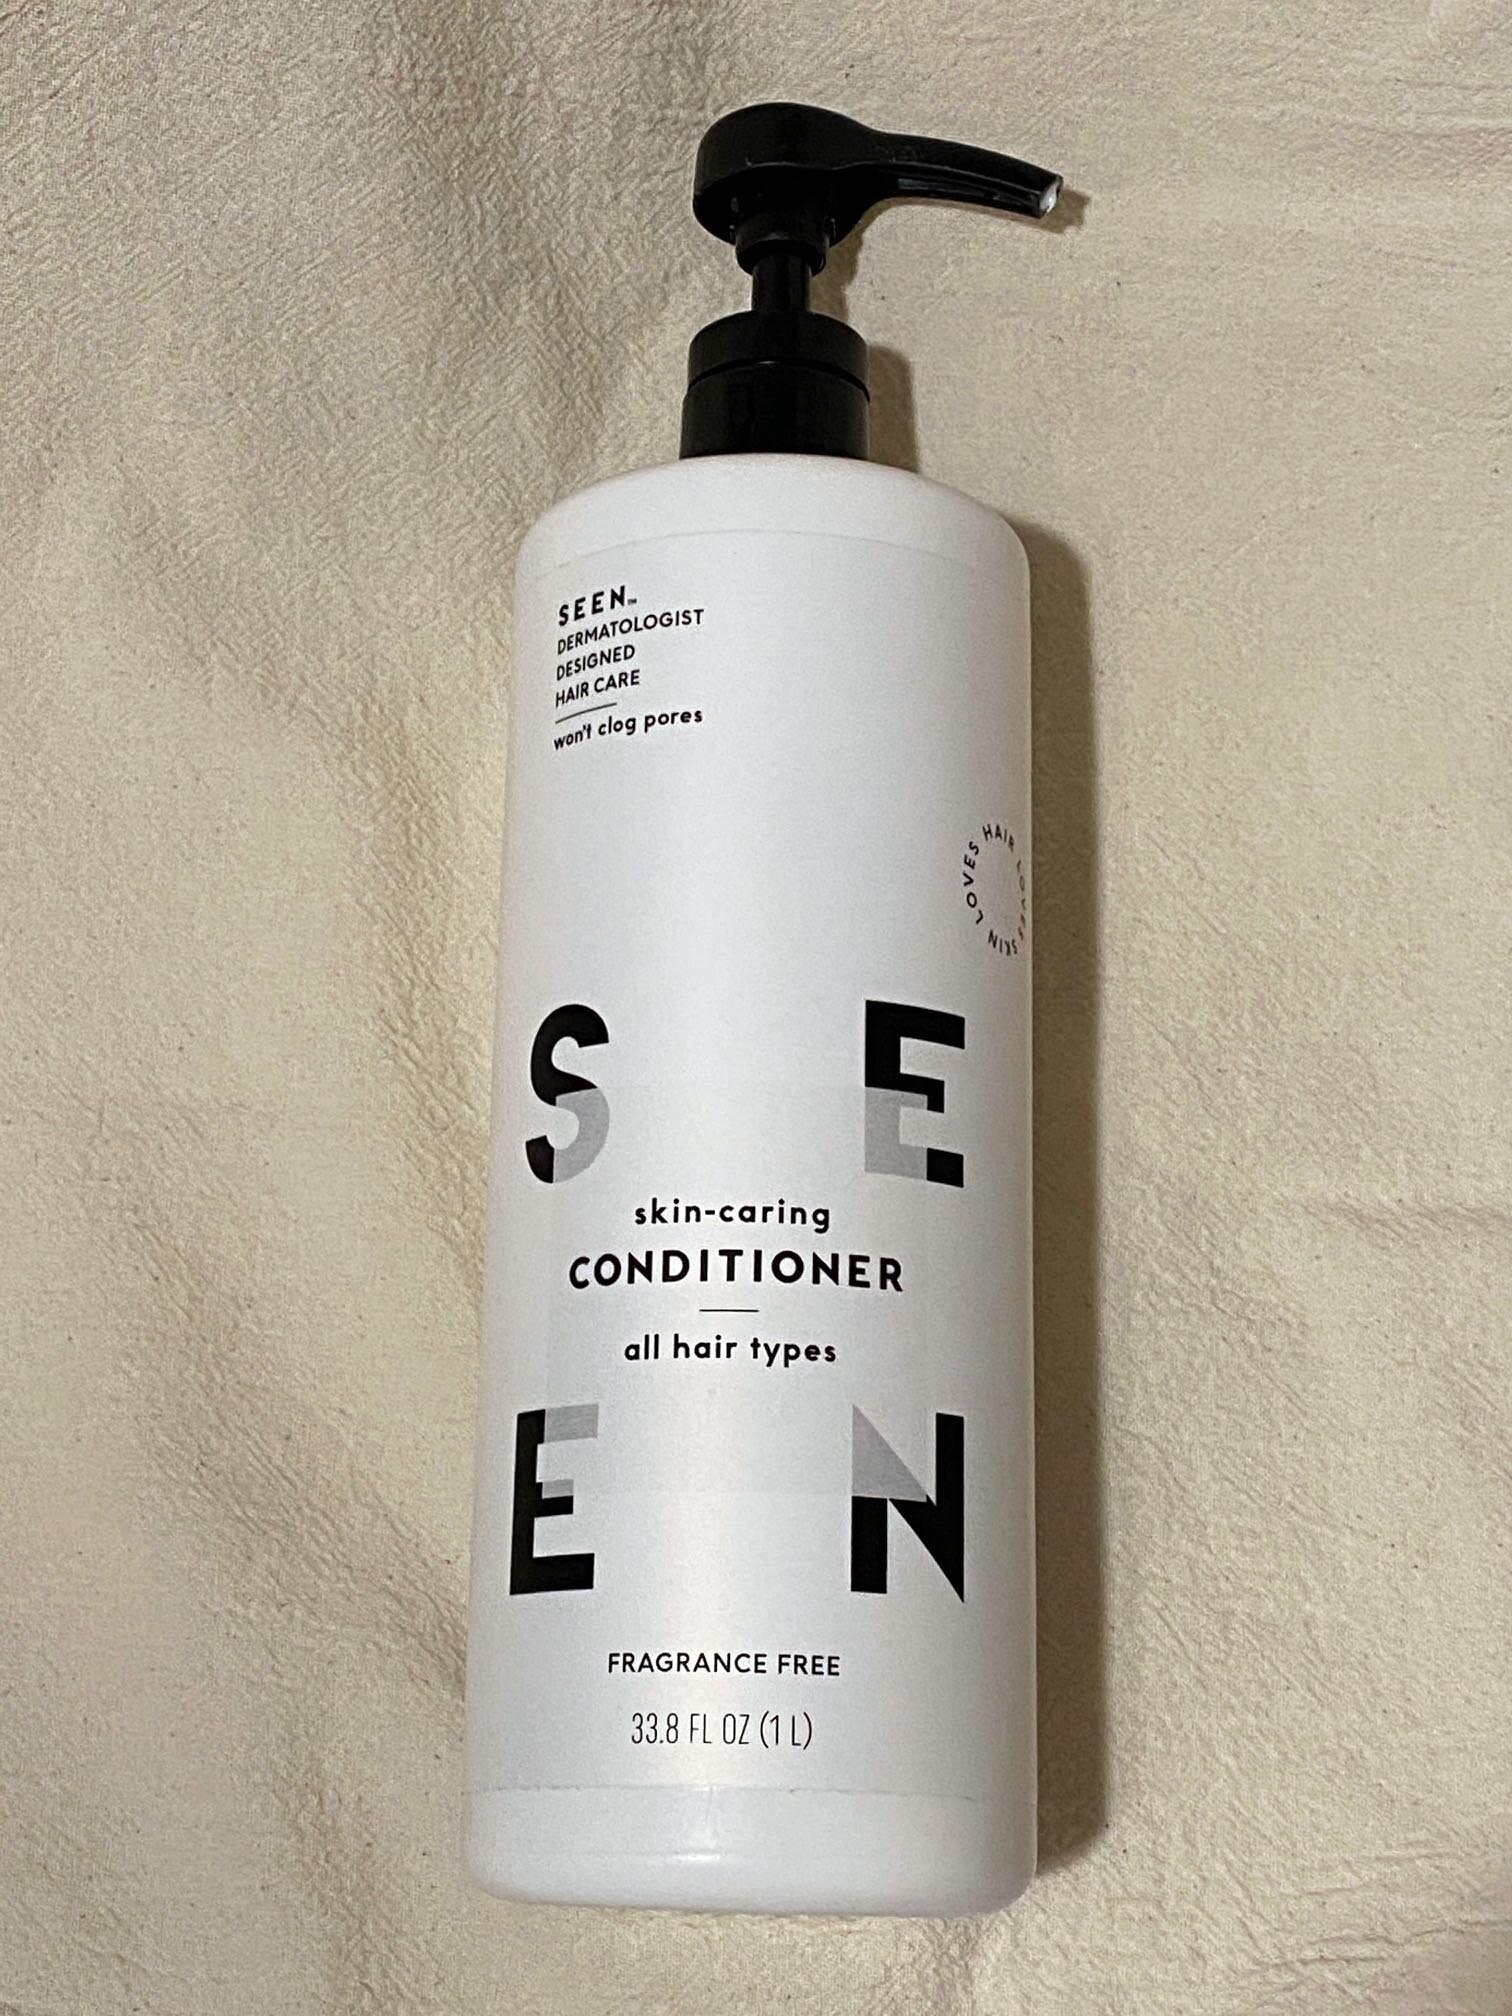 Image of SEEN: Fragrance-Free Hair Products Conditioner bottle